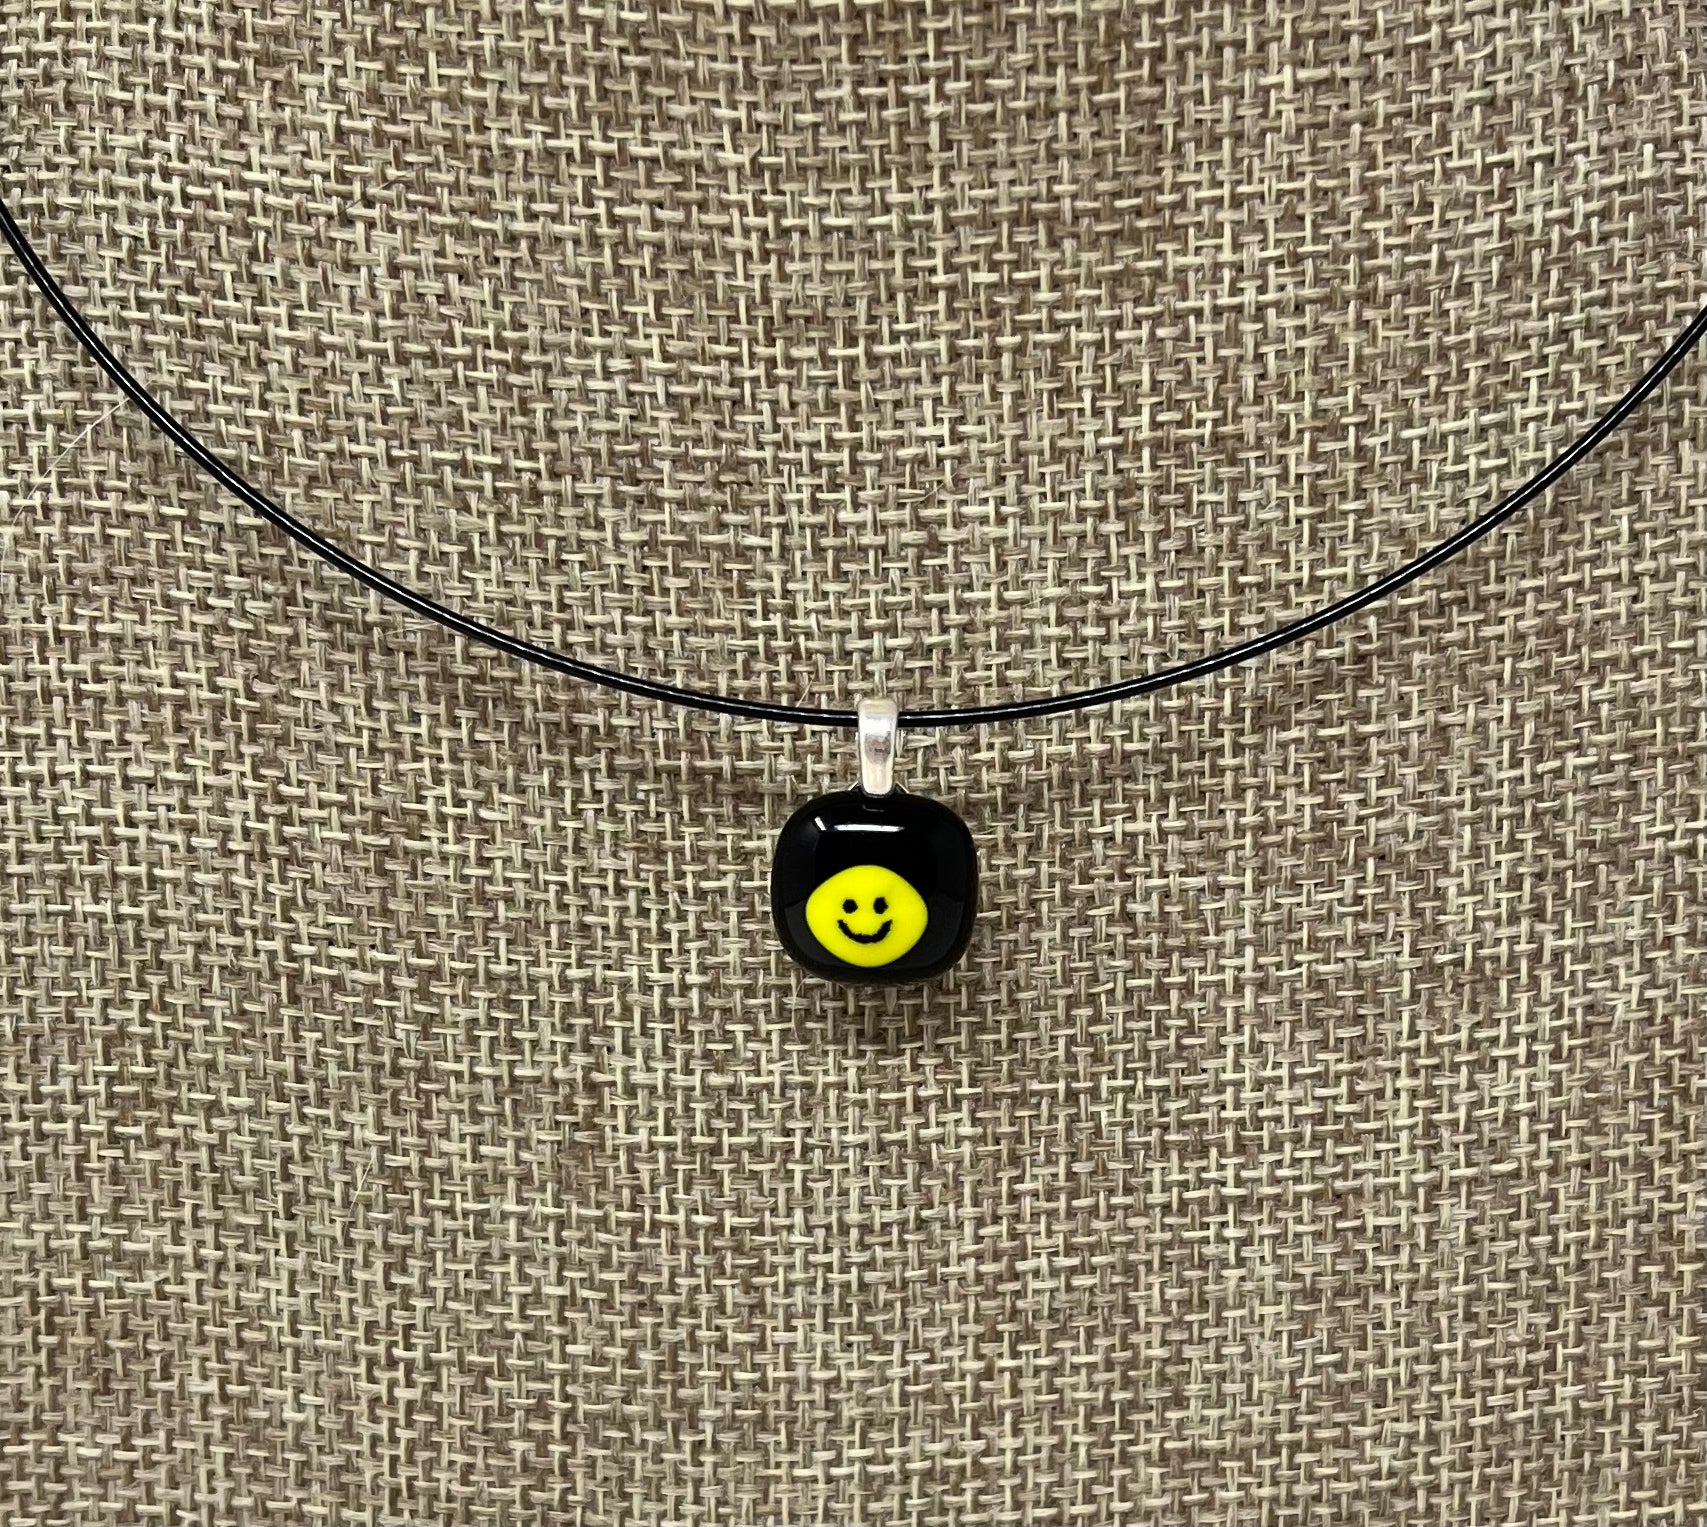 Glass Smiley Face Pendant with Cable Necklace - sm black